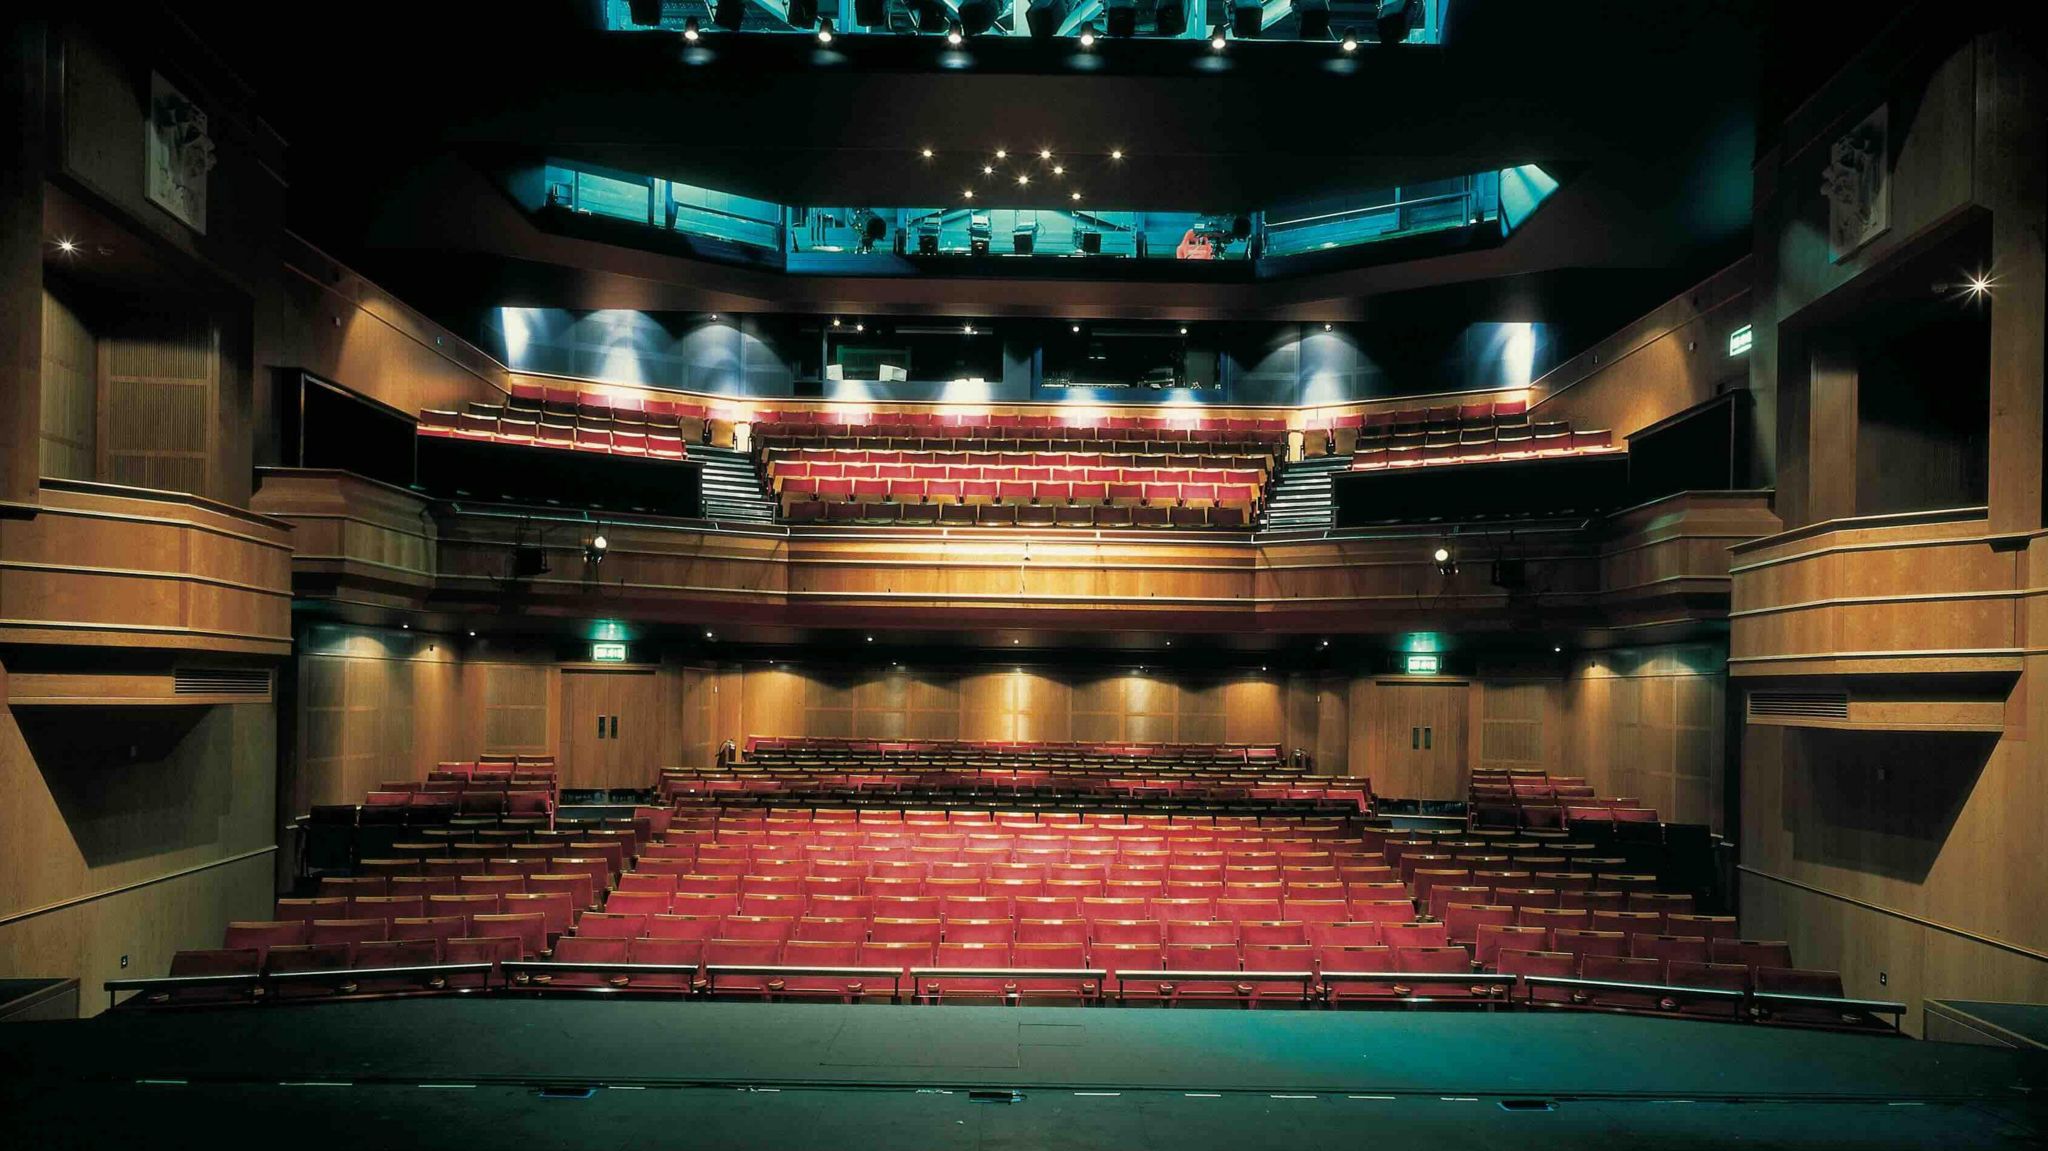 The auditorium showing the stage